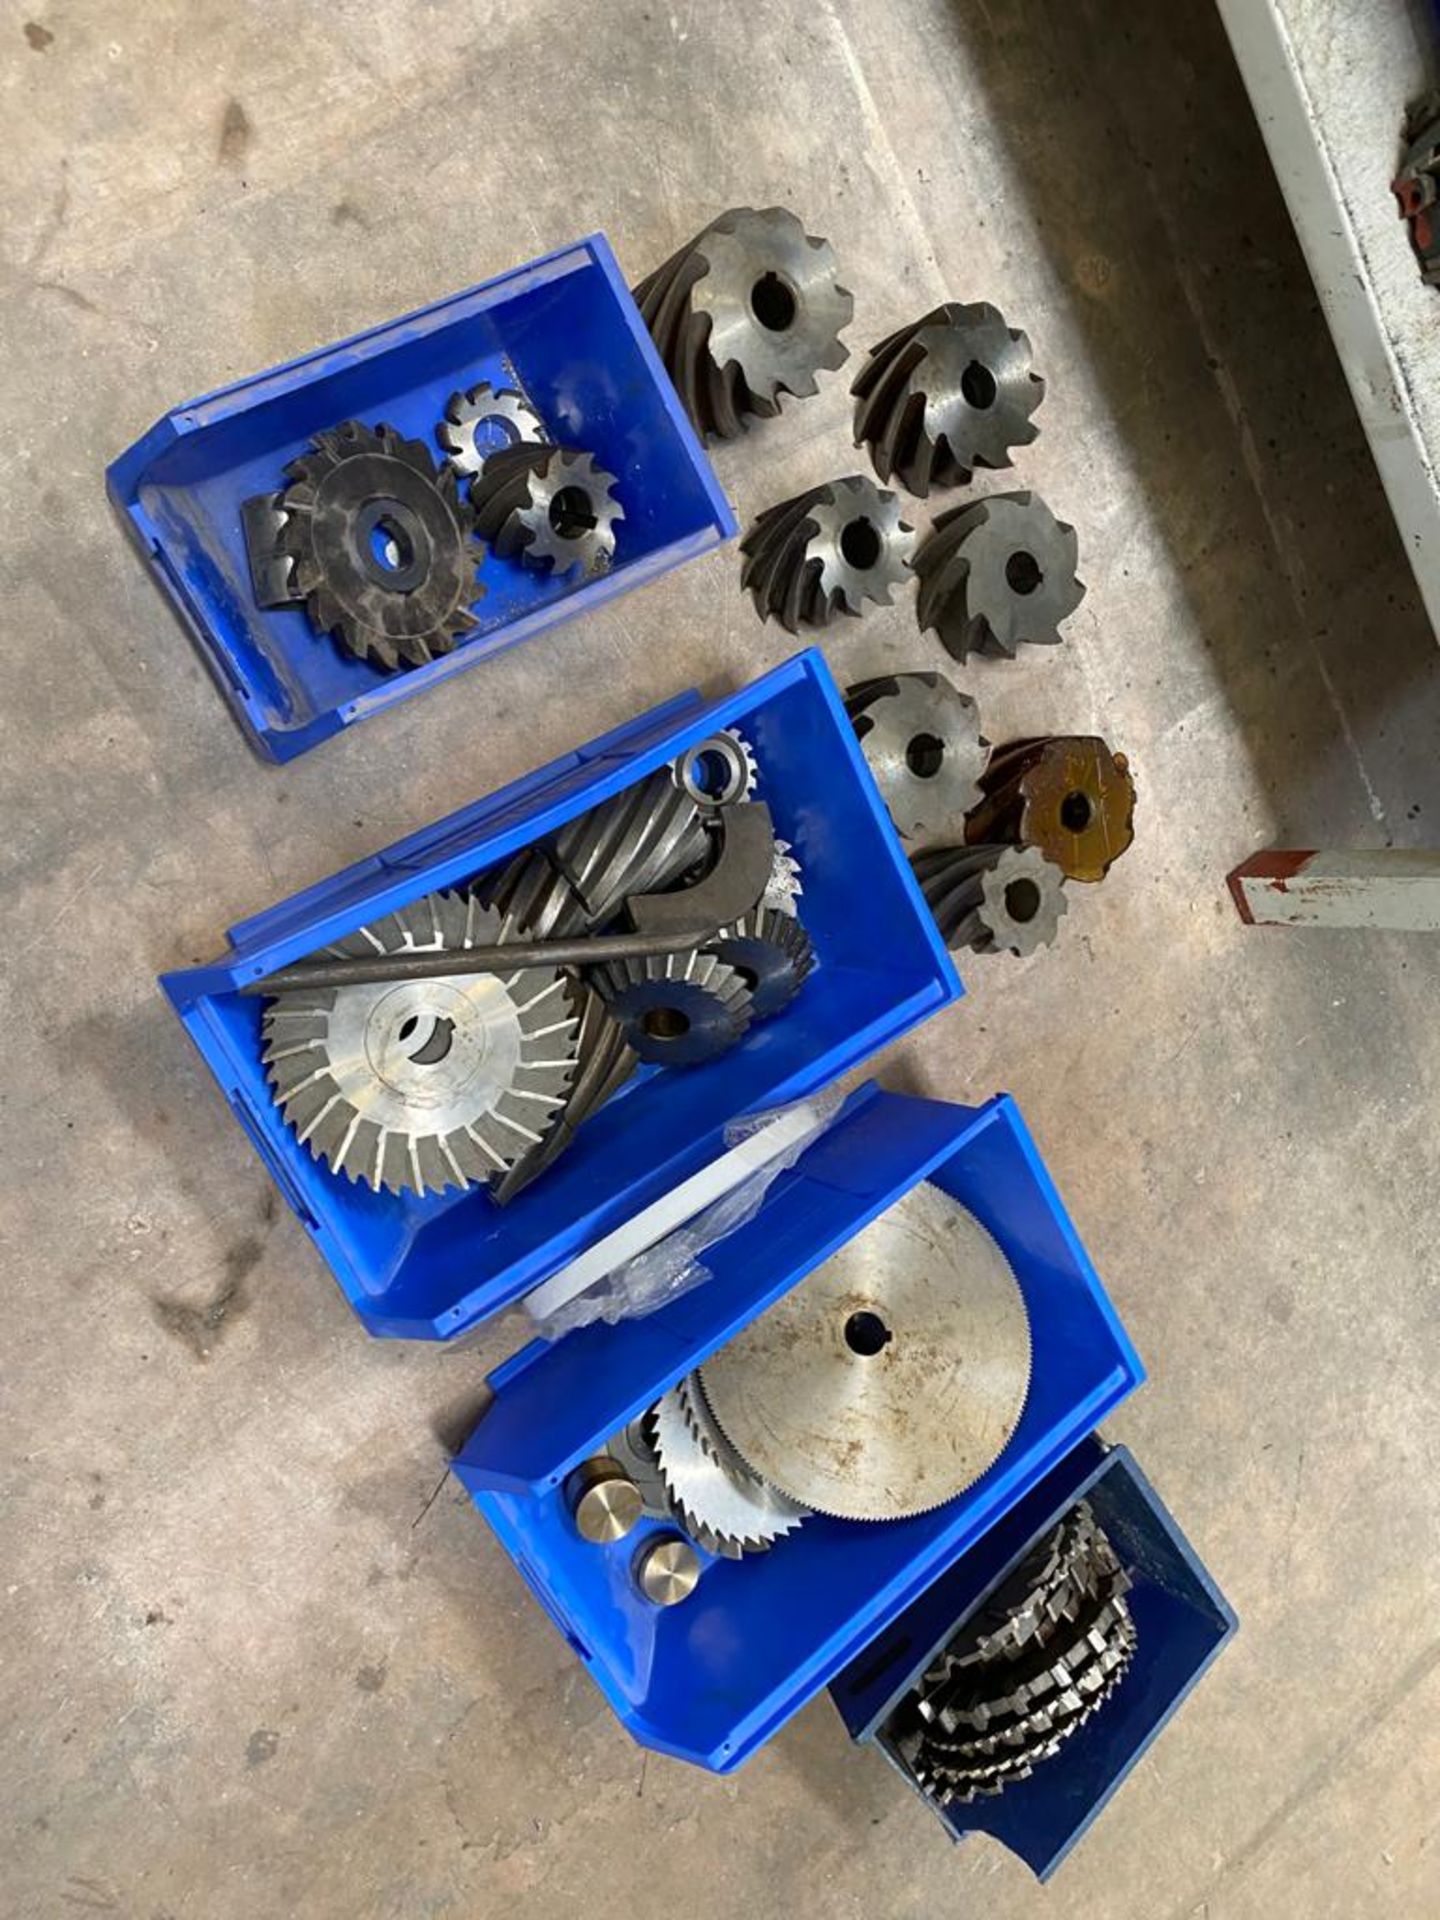 A Variety of Cutting Blades, Gears and Cogs - Image 2 of 7